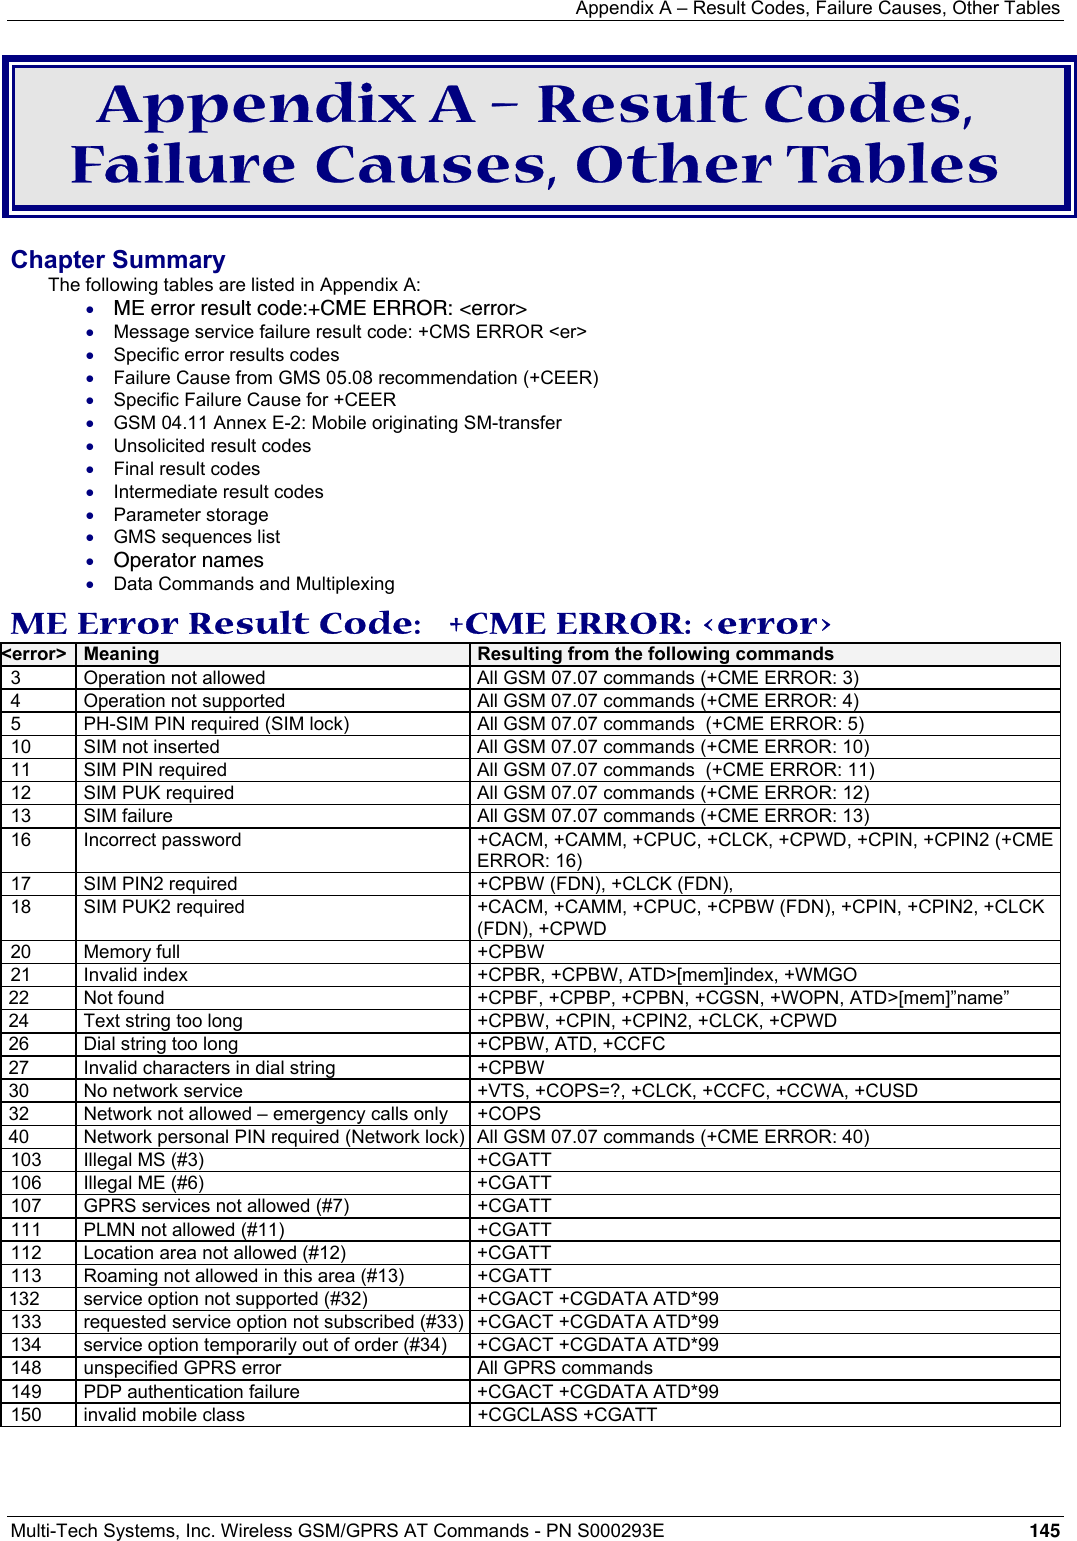 Appendix A – Result Codes, Failure Causes, Other Tables Multi-Tech Systems, Inc. Wireless GSM/GPRS AT Commands - PN S000293E 145  Appendix A – Result Codes, Failure Causes, Other Tables  Chapter Summary The following tables are listed in Appendix A: • ME error result code:+CME ERROR: &lt;error&gt; • Message service failure result code: +CMS ERROR &lt;er&gt; • Specific error results codes • Failure Cause from GMS 05.08 recommendation (+CEER) • Specific Failure Cause for +CEER • GSM 04.11 Annex E-2: Mobile originating SM-transfer • Unsolicited result codes • Final result codes • Intermediate result codes • Parameter storage • GMS sequences list • Operator names • Data Commands and Multiplexing ME Error Result Code:   +CME ERROR: &lt;error&gt;  &lt;error&gt;   Meaning  Resulting from the following commands 3  Operation not allowed  All GSM 07.07 commands (+CME ERROR: 3) 4 Operation not supported  All GSM 07.07 commands (+CME ERROR: 4) 5  PH-SIM PIN required (SIM lock)  All GSM 07.07 commands  (+CME ERROR: 5) 10  SIM not inserted  All GSM 07.07 commands (+CME ERROR: 10) 11  SIM PIN required  All GSM 07.07 commands  (+CME ERROR: 11) 12  SIM PUK required  All GSM 07.07 commands (+CME ERROR: 12) 13  SIM failure  All GSM 07.07 commands (+CME ERROR: 13) 16  Incorrect password  +CACM, +CAMM, +CPUC, +CLCK, +CPWD, +CPIN, +CPIN2 (+CME ERROR: 16) 17  SIM PIN2 required  +CPBW (FDN), +CLCK (FDN),  18  SIM PUK2 required  +CACM, +CAMM, +CPUC, +CPBW (FDN), +CPIN, +CPIN2, +CLCK (FDN), +CPWD 20  Memory full   +CPBW 21   Invalid index  +CPBR, +CPBW, ATD&gt;[mem]index, +WMGO 22  Not found  +CPBF, +CPBP, +CPBN, +CGSN, +WOPN, ATD&gt;[mem]”name” 24  Text string too long  +CPBW, +CPIN, +CPIN2, +CLCK, +CPWD 26  Dial string too long  +CPBW, ATD, +CCFC 27  Invalid characters in dial string  +CPBW 30  No network service  +VTS, +COPS=?, +CLCK, +CCFC, +CCWA, +CUSD 32  Network not allowed – emergency calls only  +COPS 40  Network personal PIN required (Network lock) All GSM 07.07 commands (+CME ERROR: 40) 103  Illegal MS (#3)  +CGATT 106  Illegal ME (#6)  +CGATT 107  GPRS services not allowed (#7)  +CGATT 111  PLMN not allowed (#11)  +CGATT 112  Location area not allowed (#12)  +CGATT 113  Roaming not allowed in this area (#13)  +CGATT 132  service option not supported (#32)  +CGACT +CGDATA ATD*99 133  requested service option not subscribed (#33) +CGACT +CGDATA ATD*99 134  service option temporarily out of order (#34)  +CGACT +CGDATA ATD*99 148  unspecified GPRS error  All GPRS commands 149  PDP authentication failure  +CGACT +CGDATA ATD*99 150  invalid mobile class  +CGCLASS +CGATT  